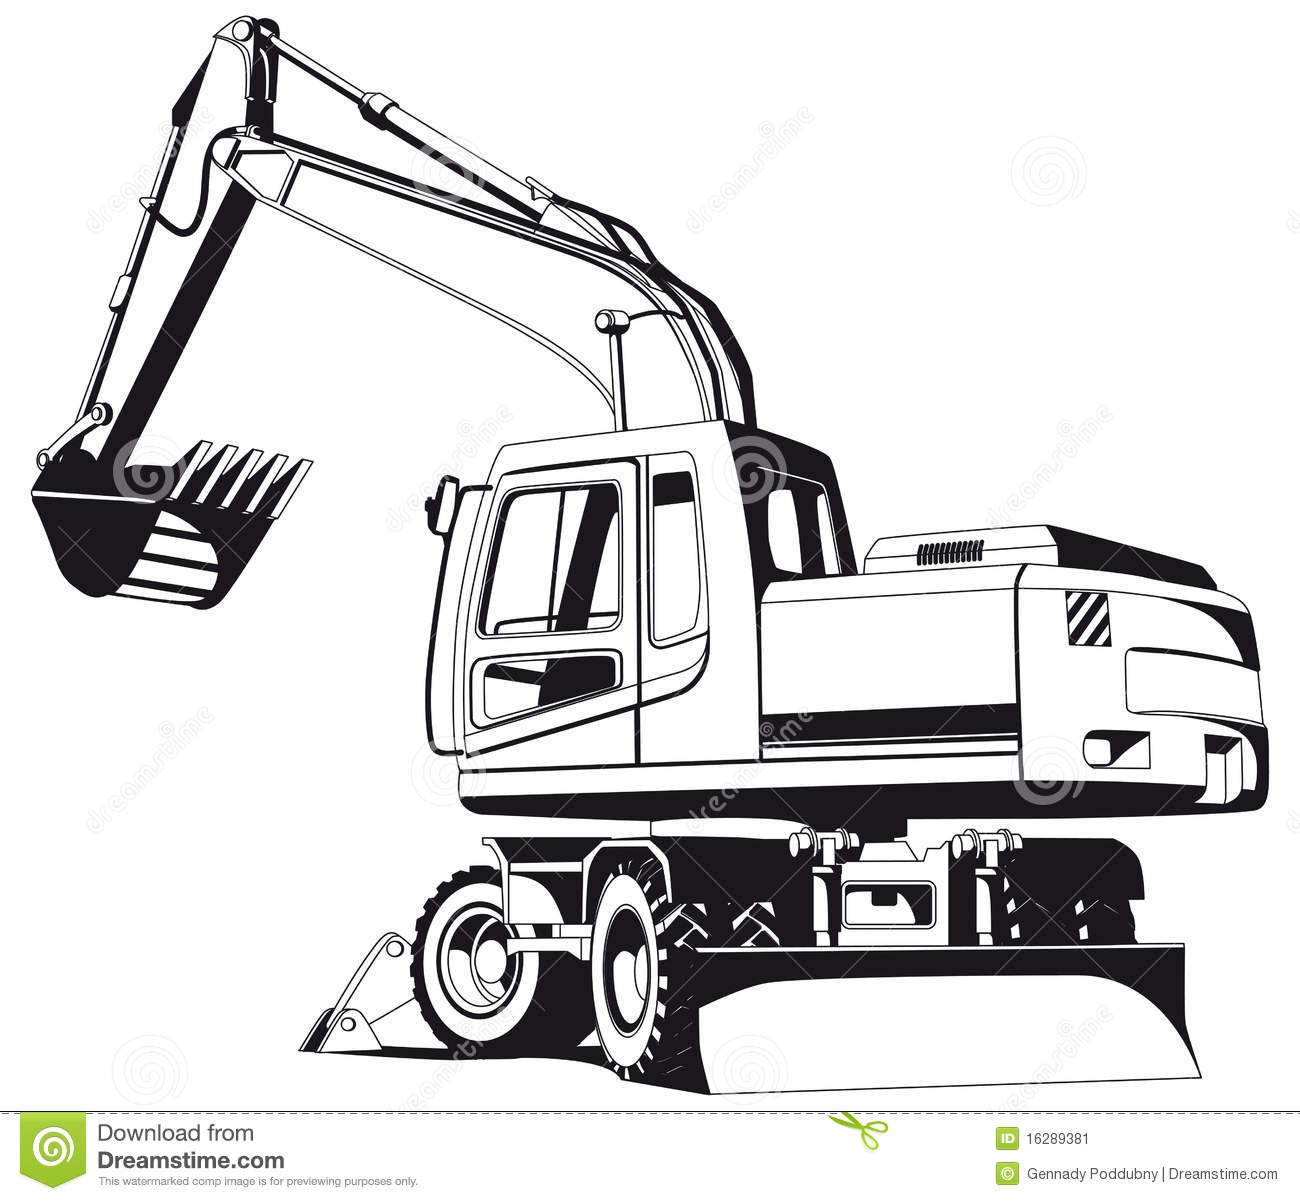 Cute excavator clipart black and white.